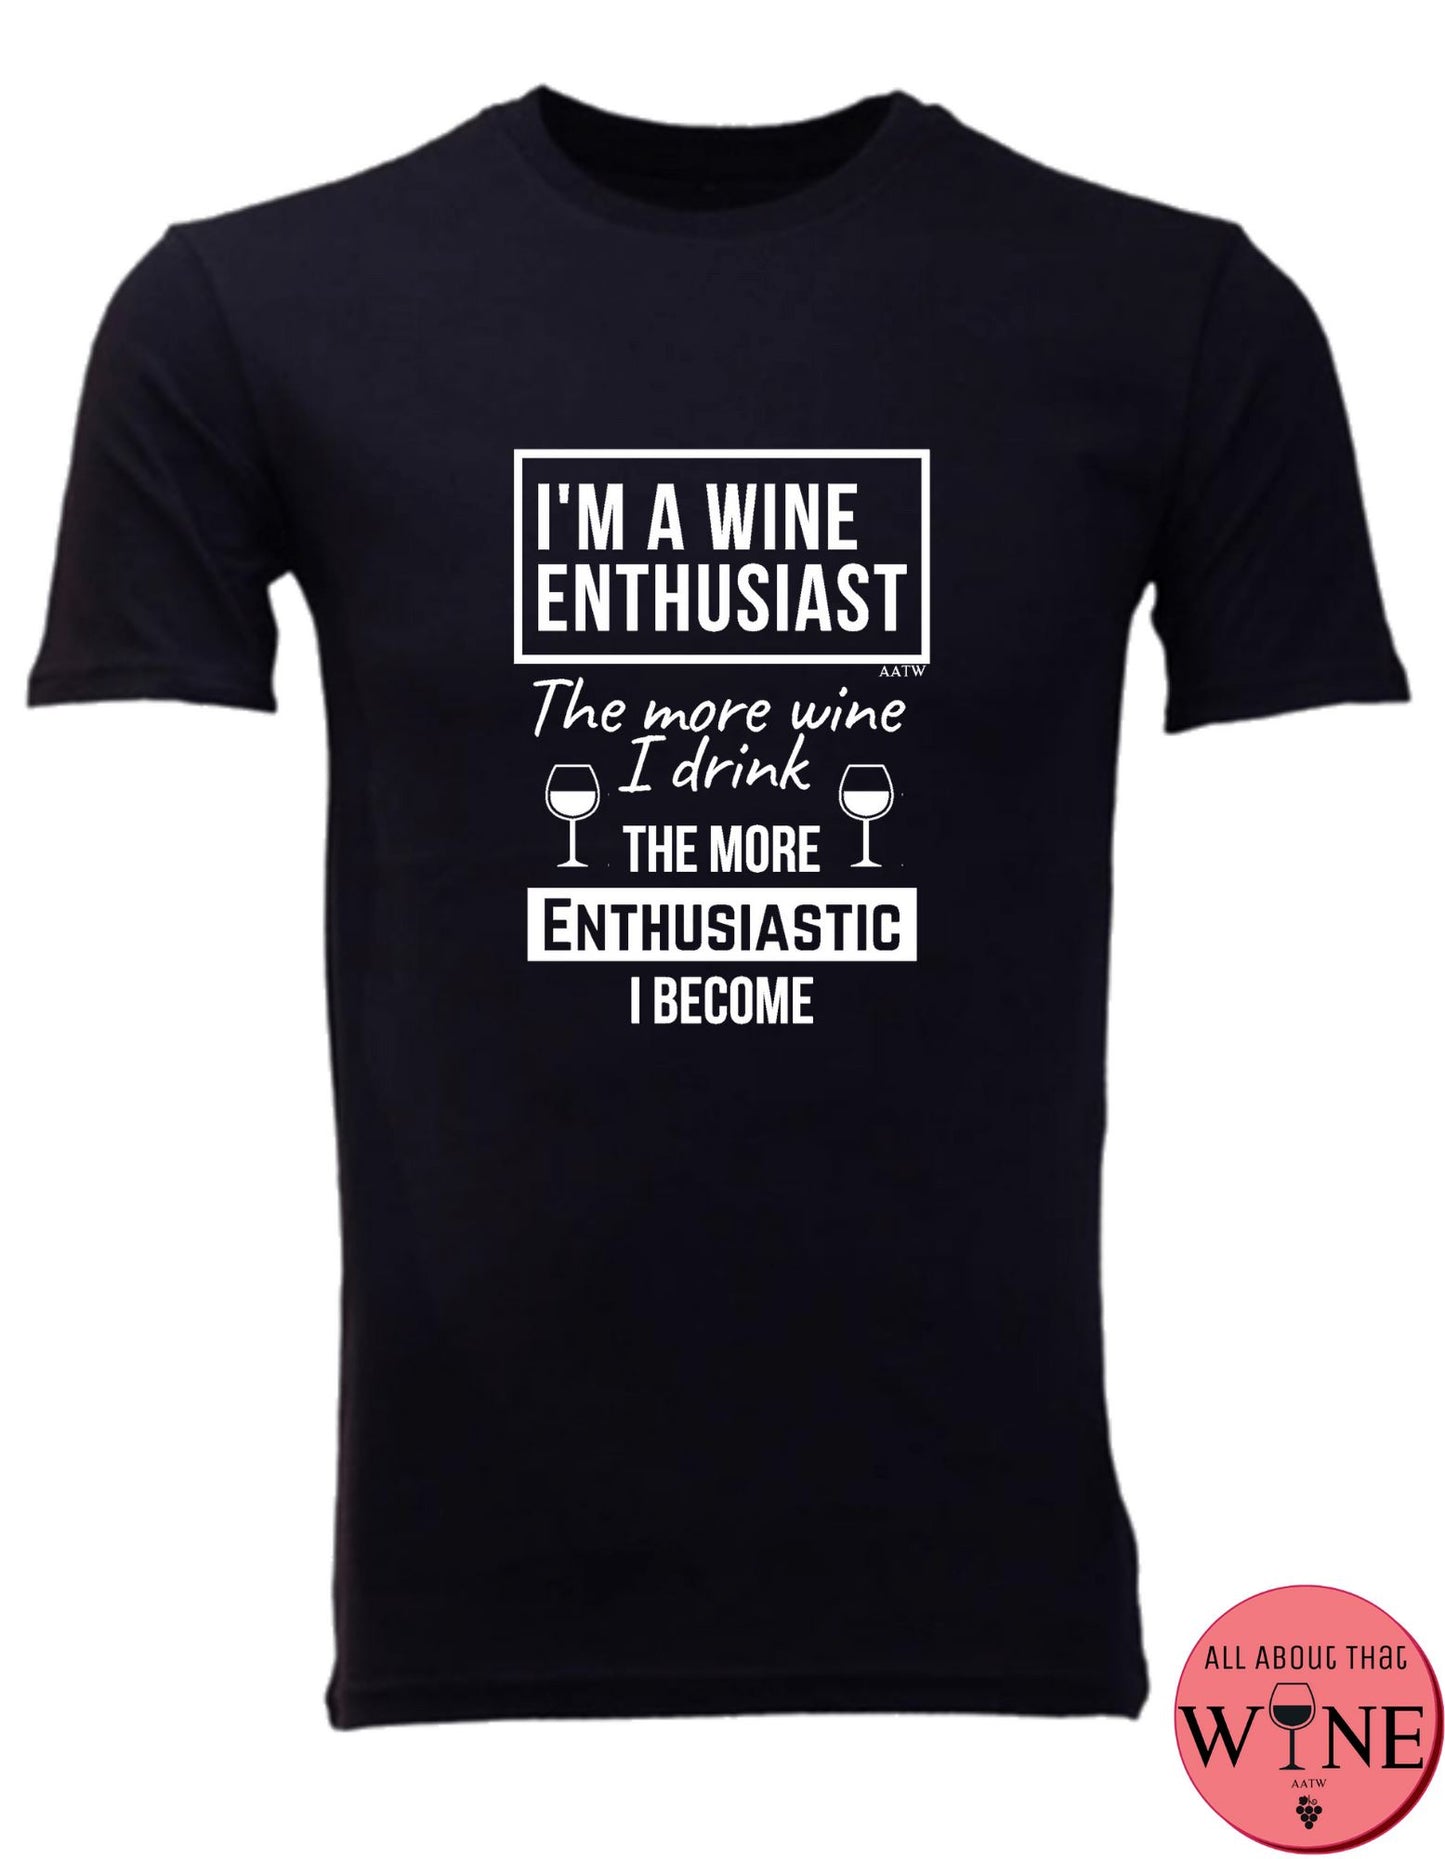 I'm A Wine Enthusiast - Men's T-shirt S Black with white